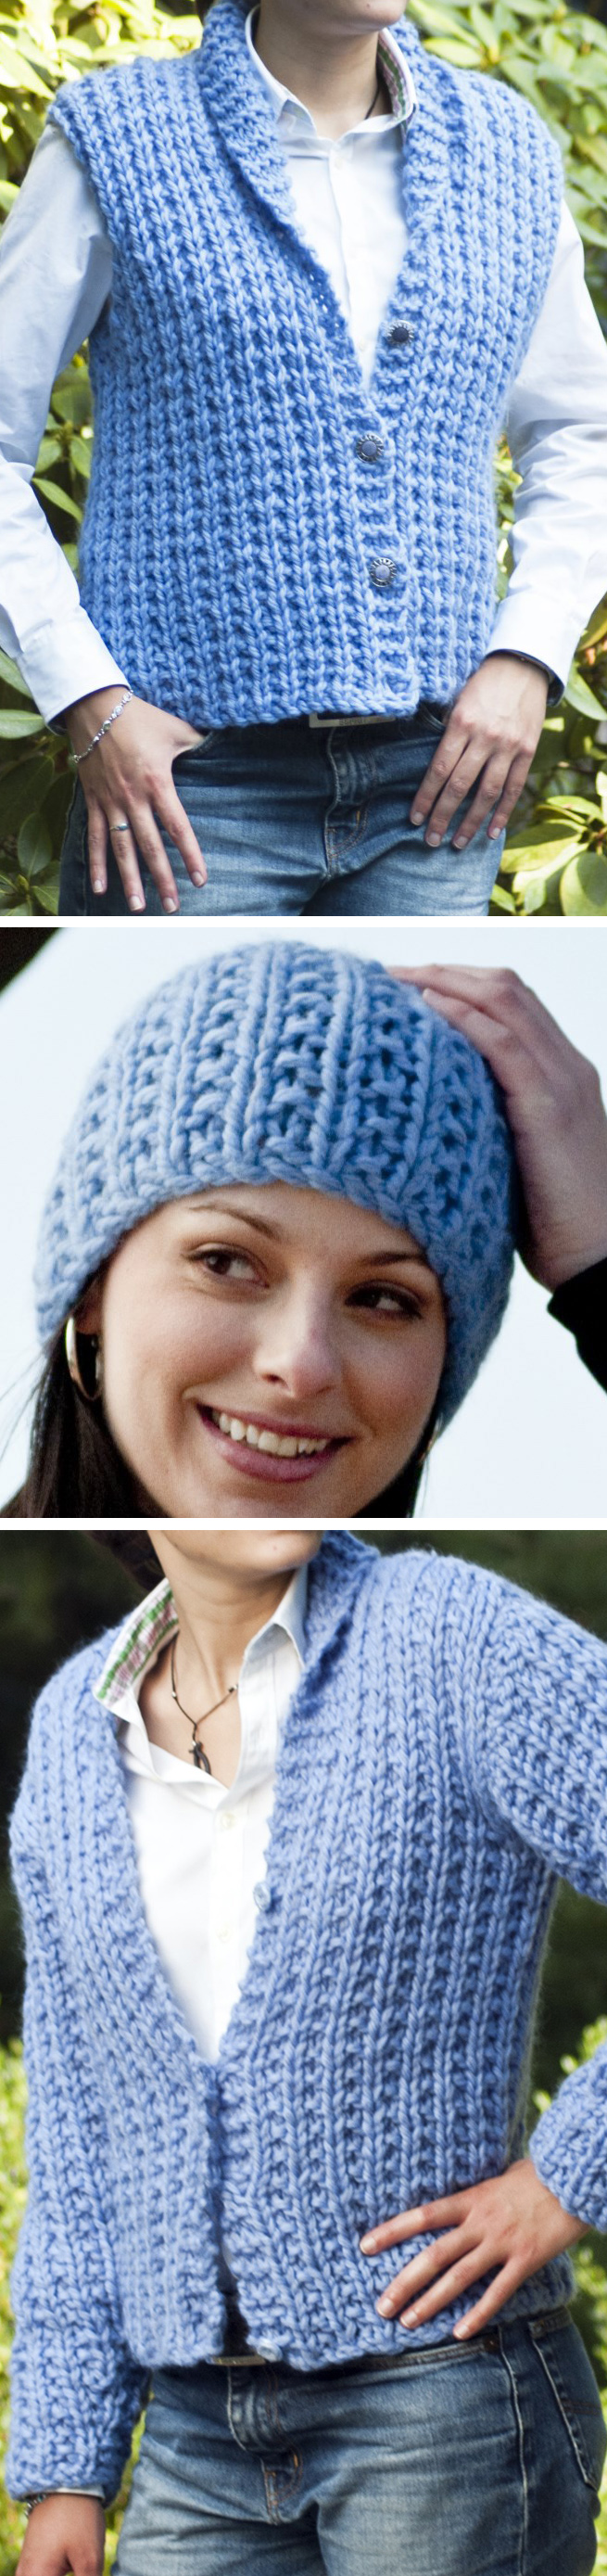 Free Knitting Pattern for 2 Row Repeat Lana Vest, Cardigan, and Hat Set